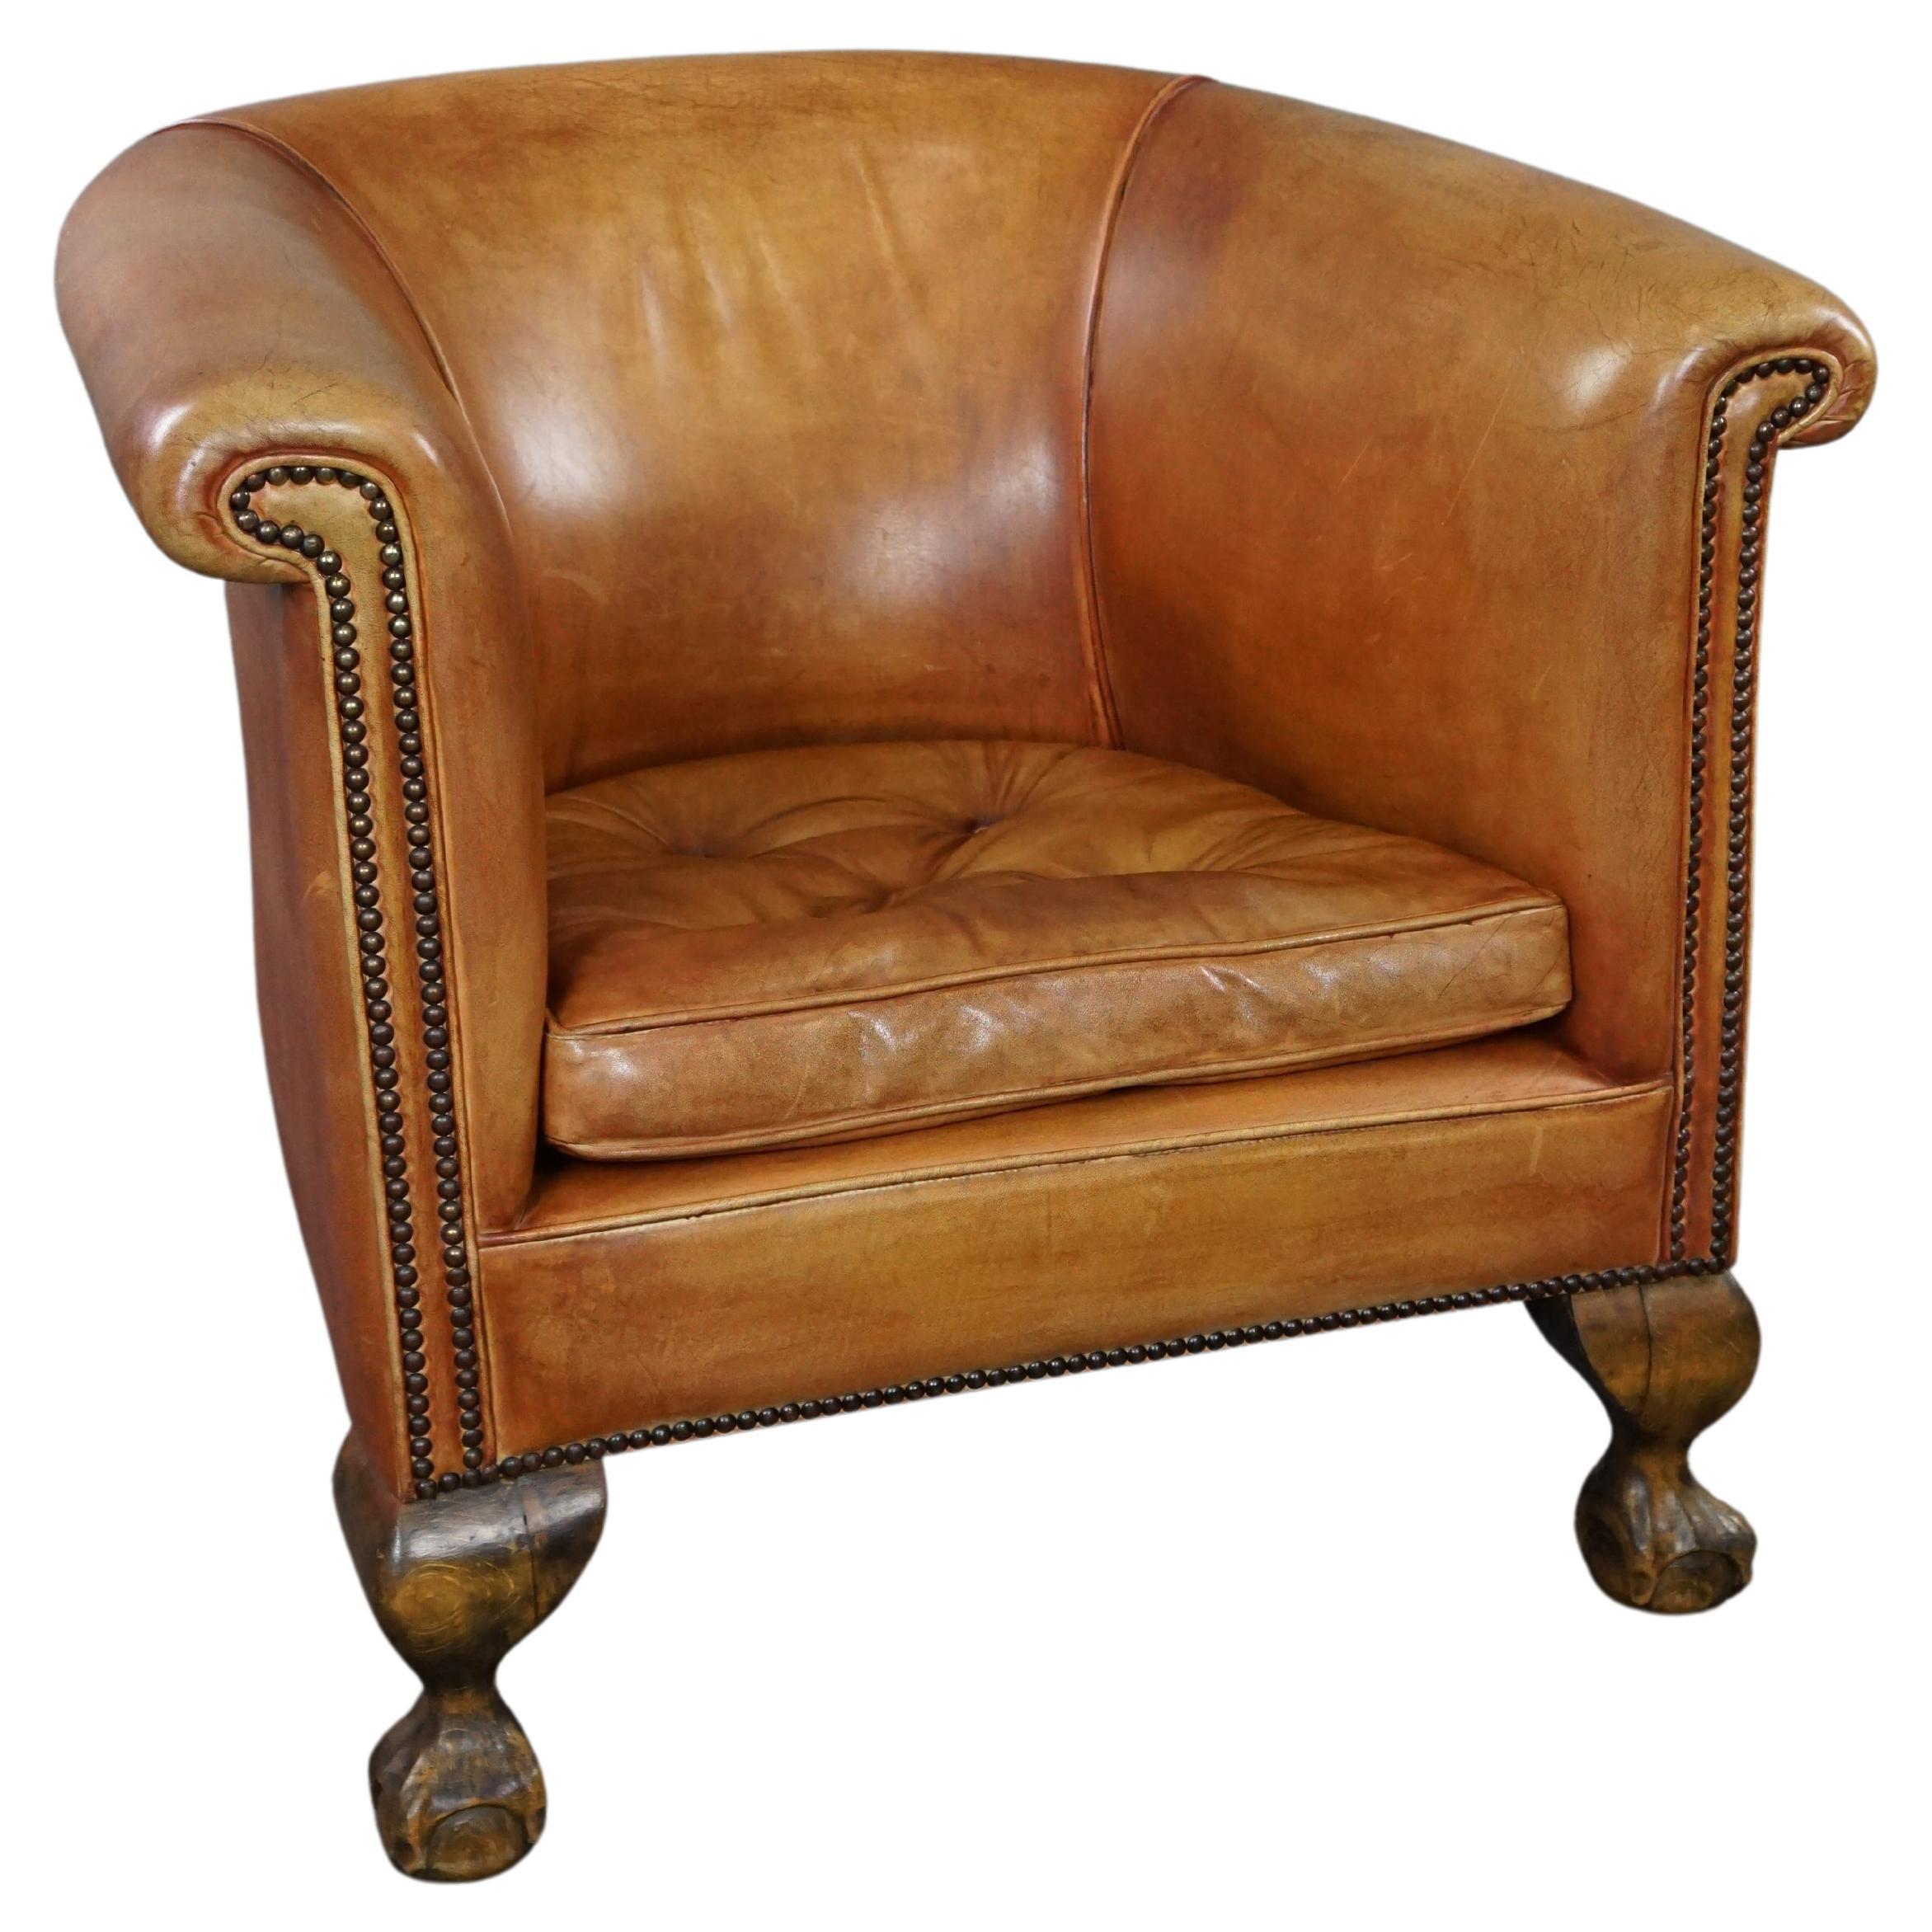 Very beautiful, uncommon cowhide club chair For Sale